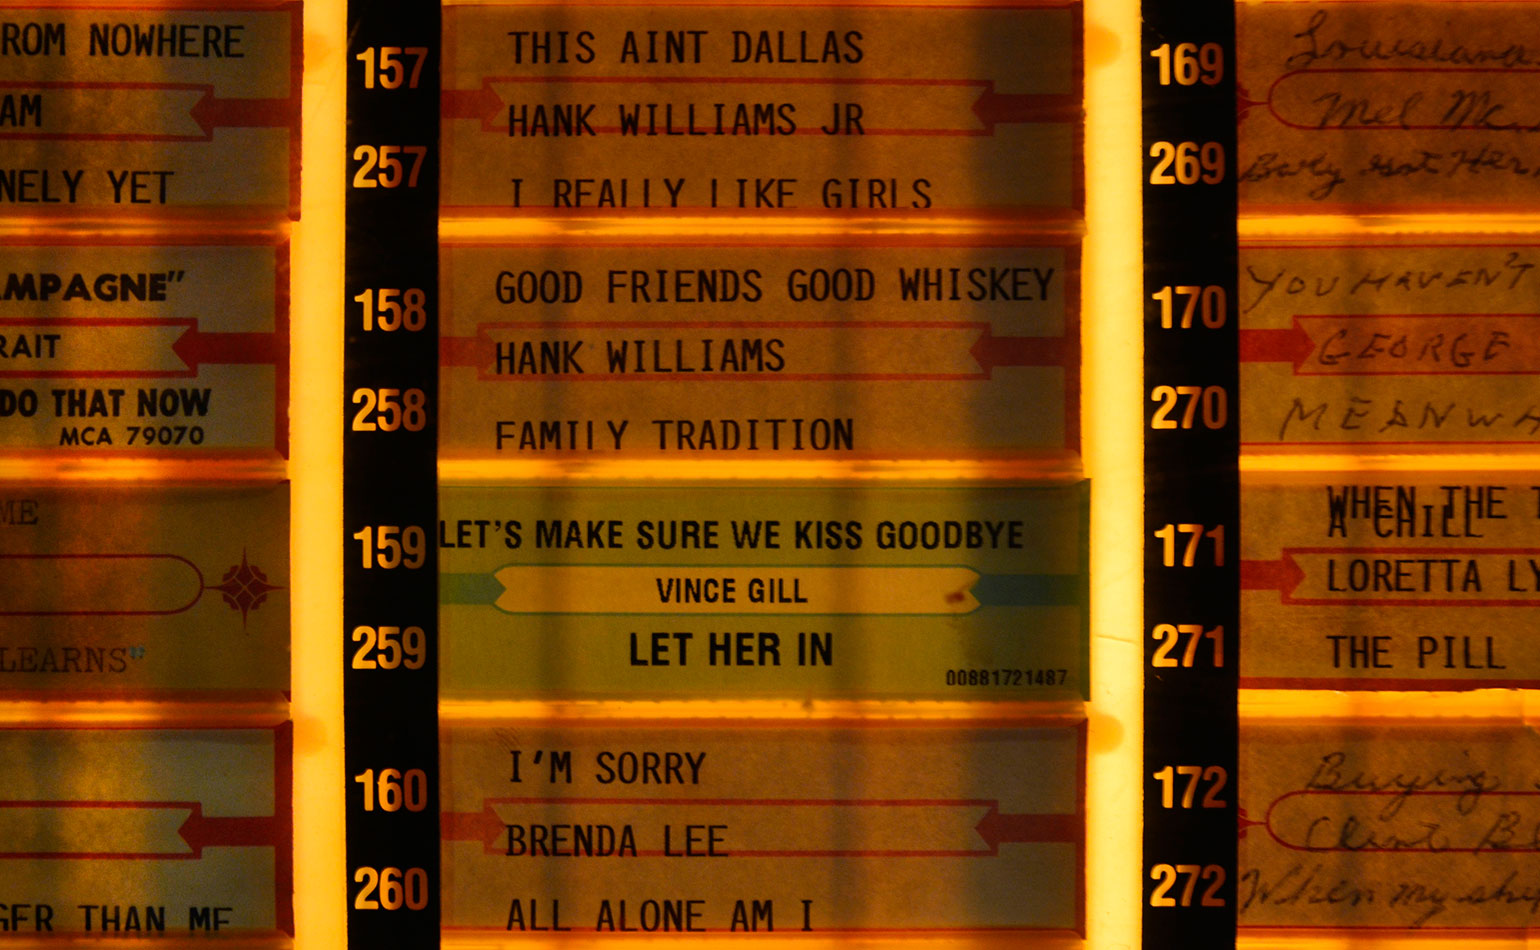 Dive Bar Kids - Rom Nowhere This Aint Dallas 157 Am Hank Williams Jr 169 Loualance mel Me 269 Baby Wat her Nely Yet 257 I Really Girls Mpagne" Good Friends Good Whiskey You Haven'S 158 170 you Rait Hank Williams George 270 Meanwa Do That Now Mca 79070 258